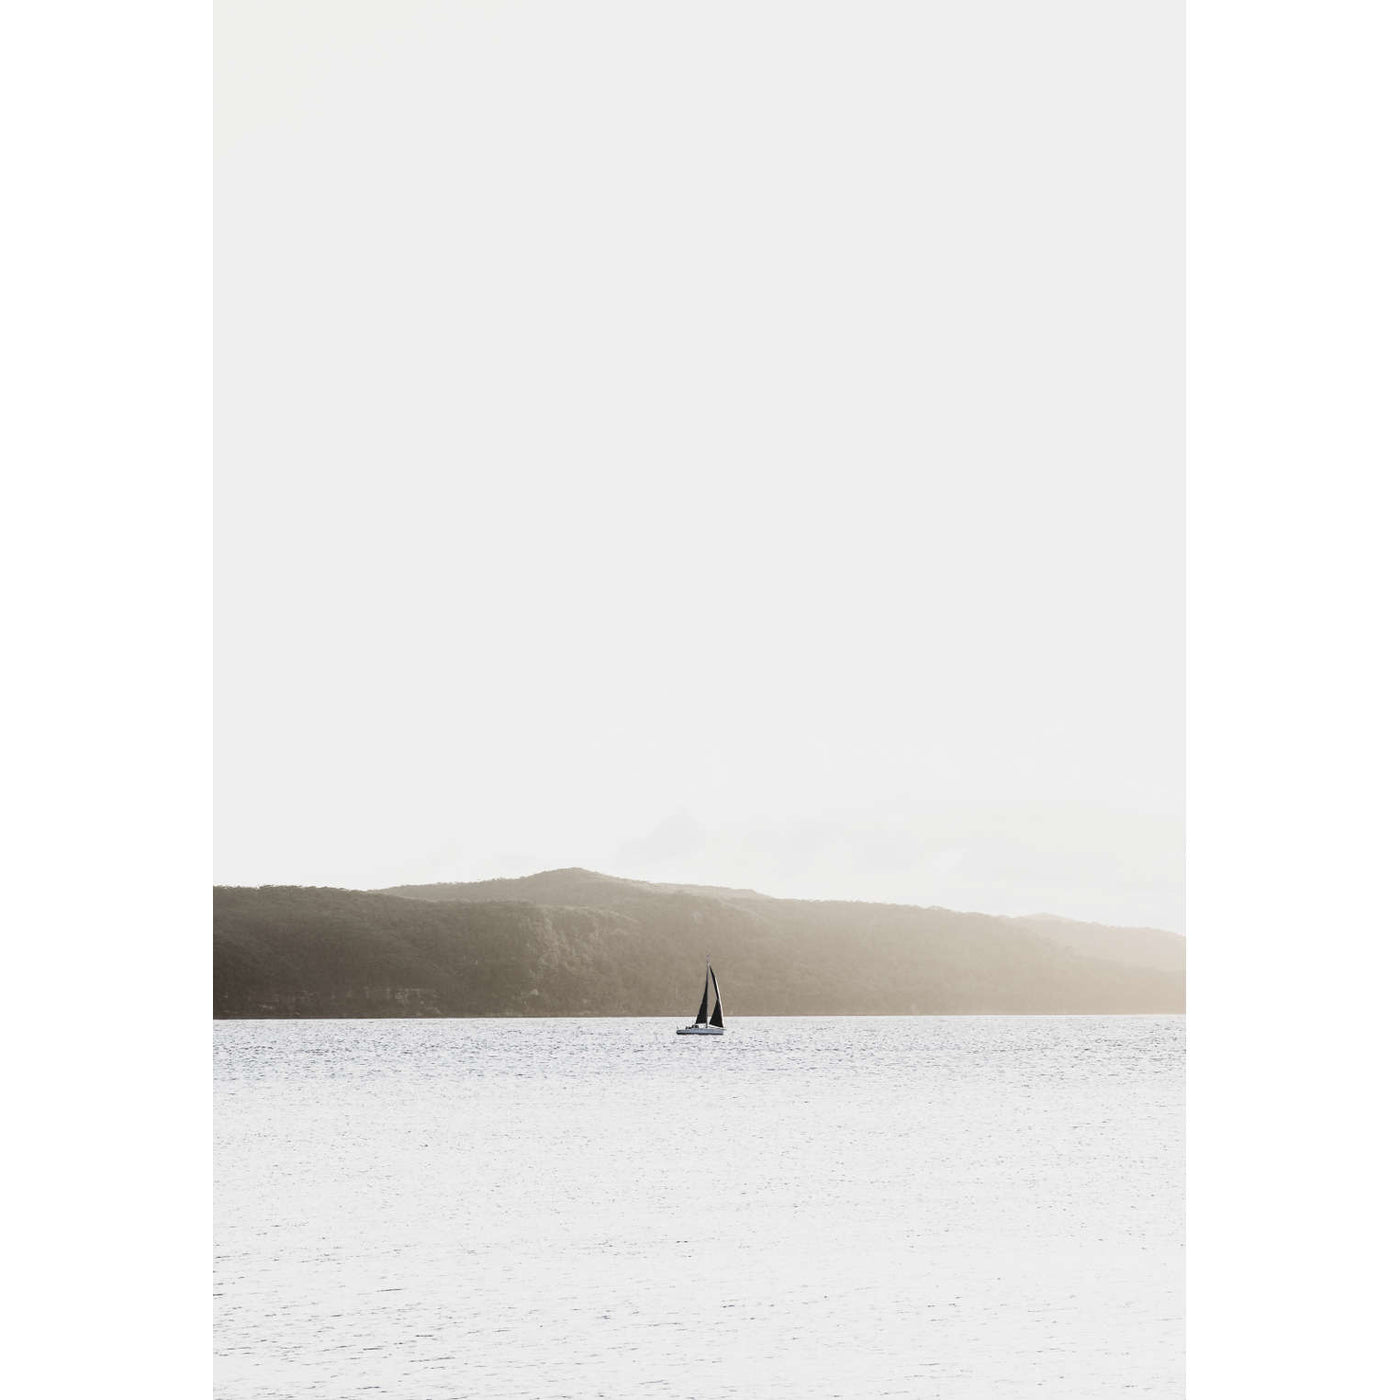 Lonely Sailboat